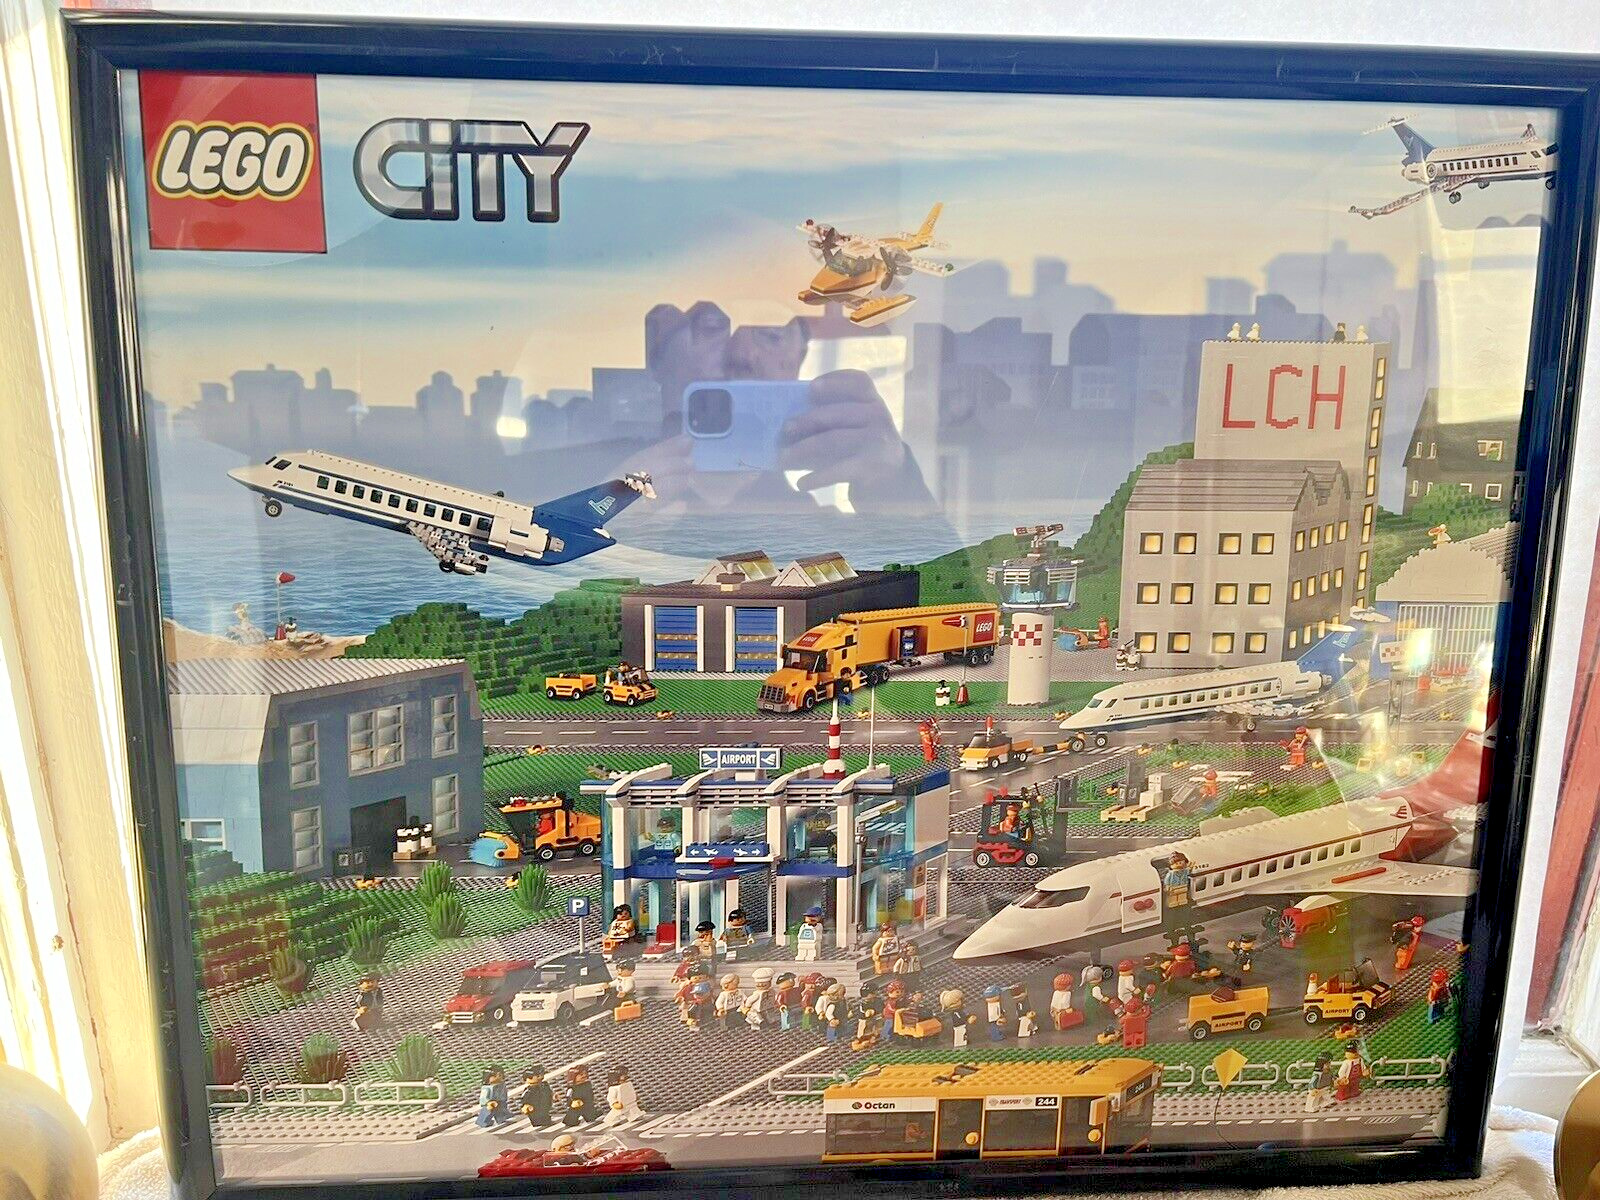 Lego City Poster Airport Airplanes Cityscape approx. 23" x 19" hard to find